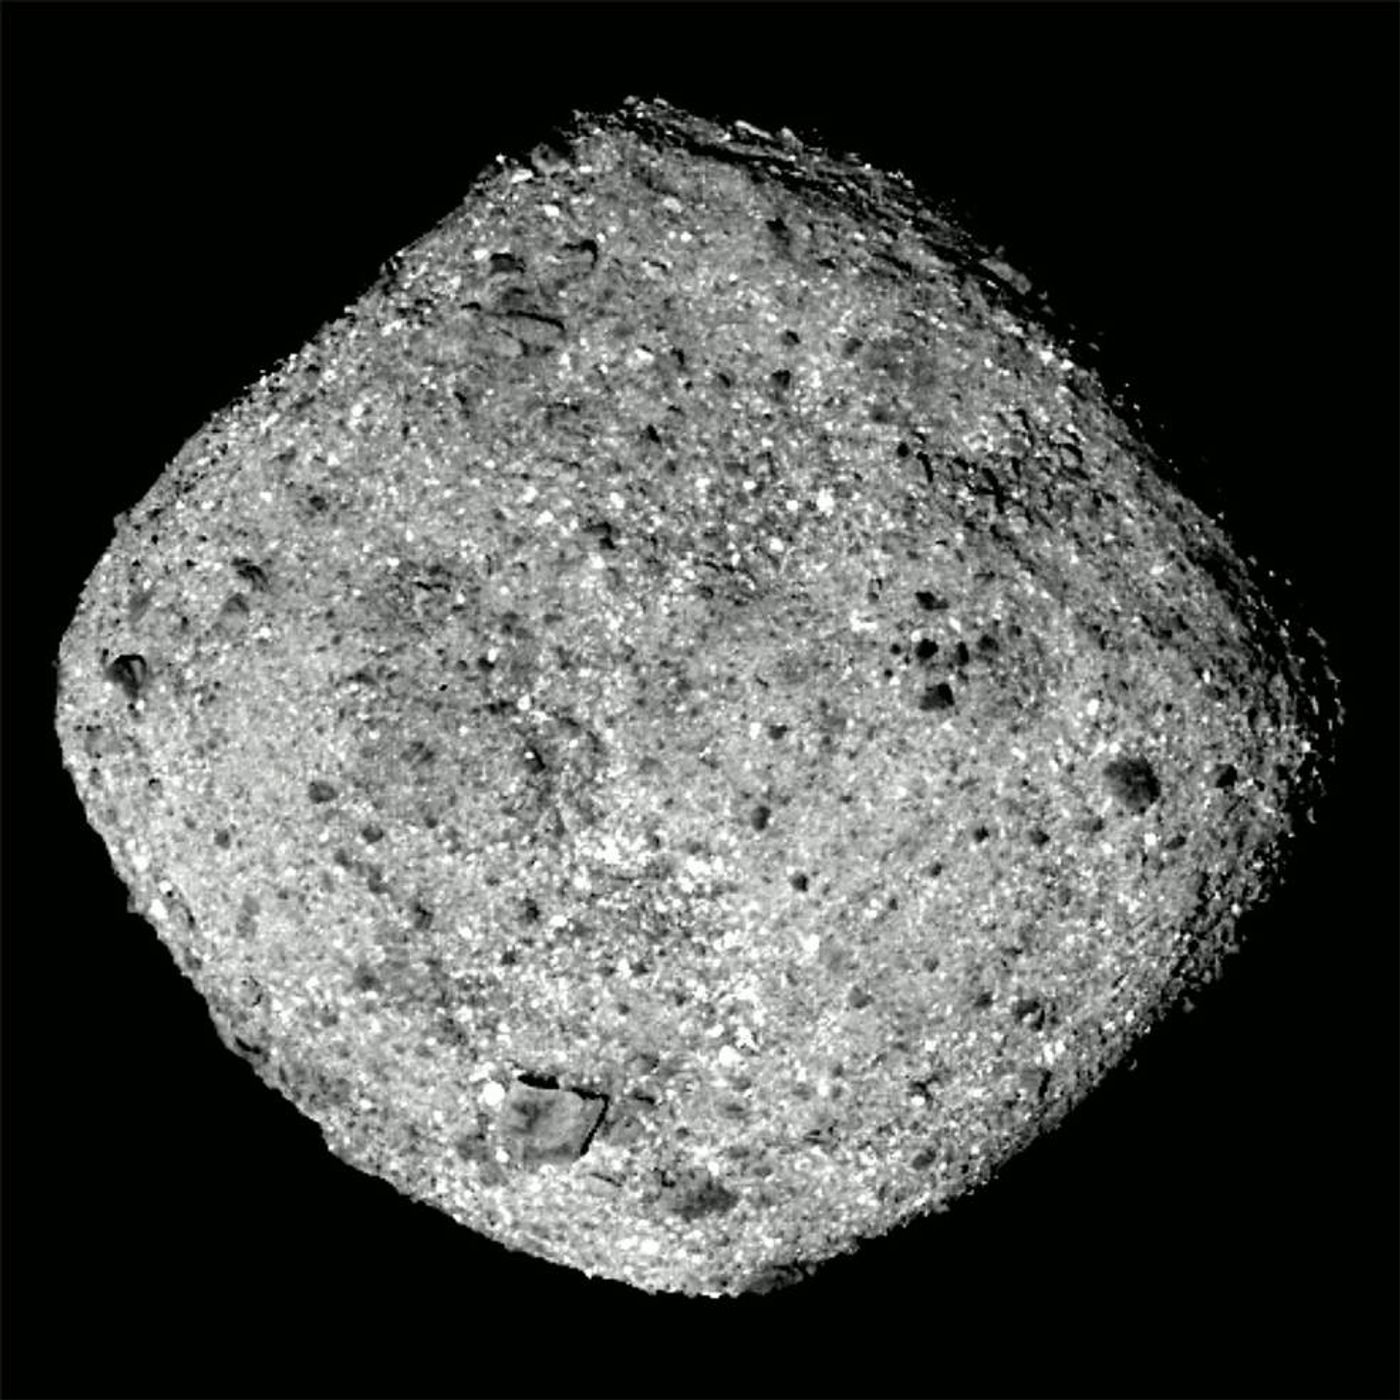 An image of Bennu, captured by OSIRIS-REx from just 50 miles away.